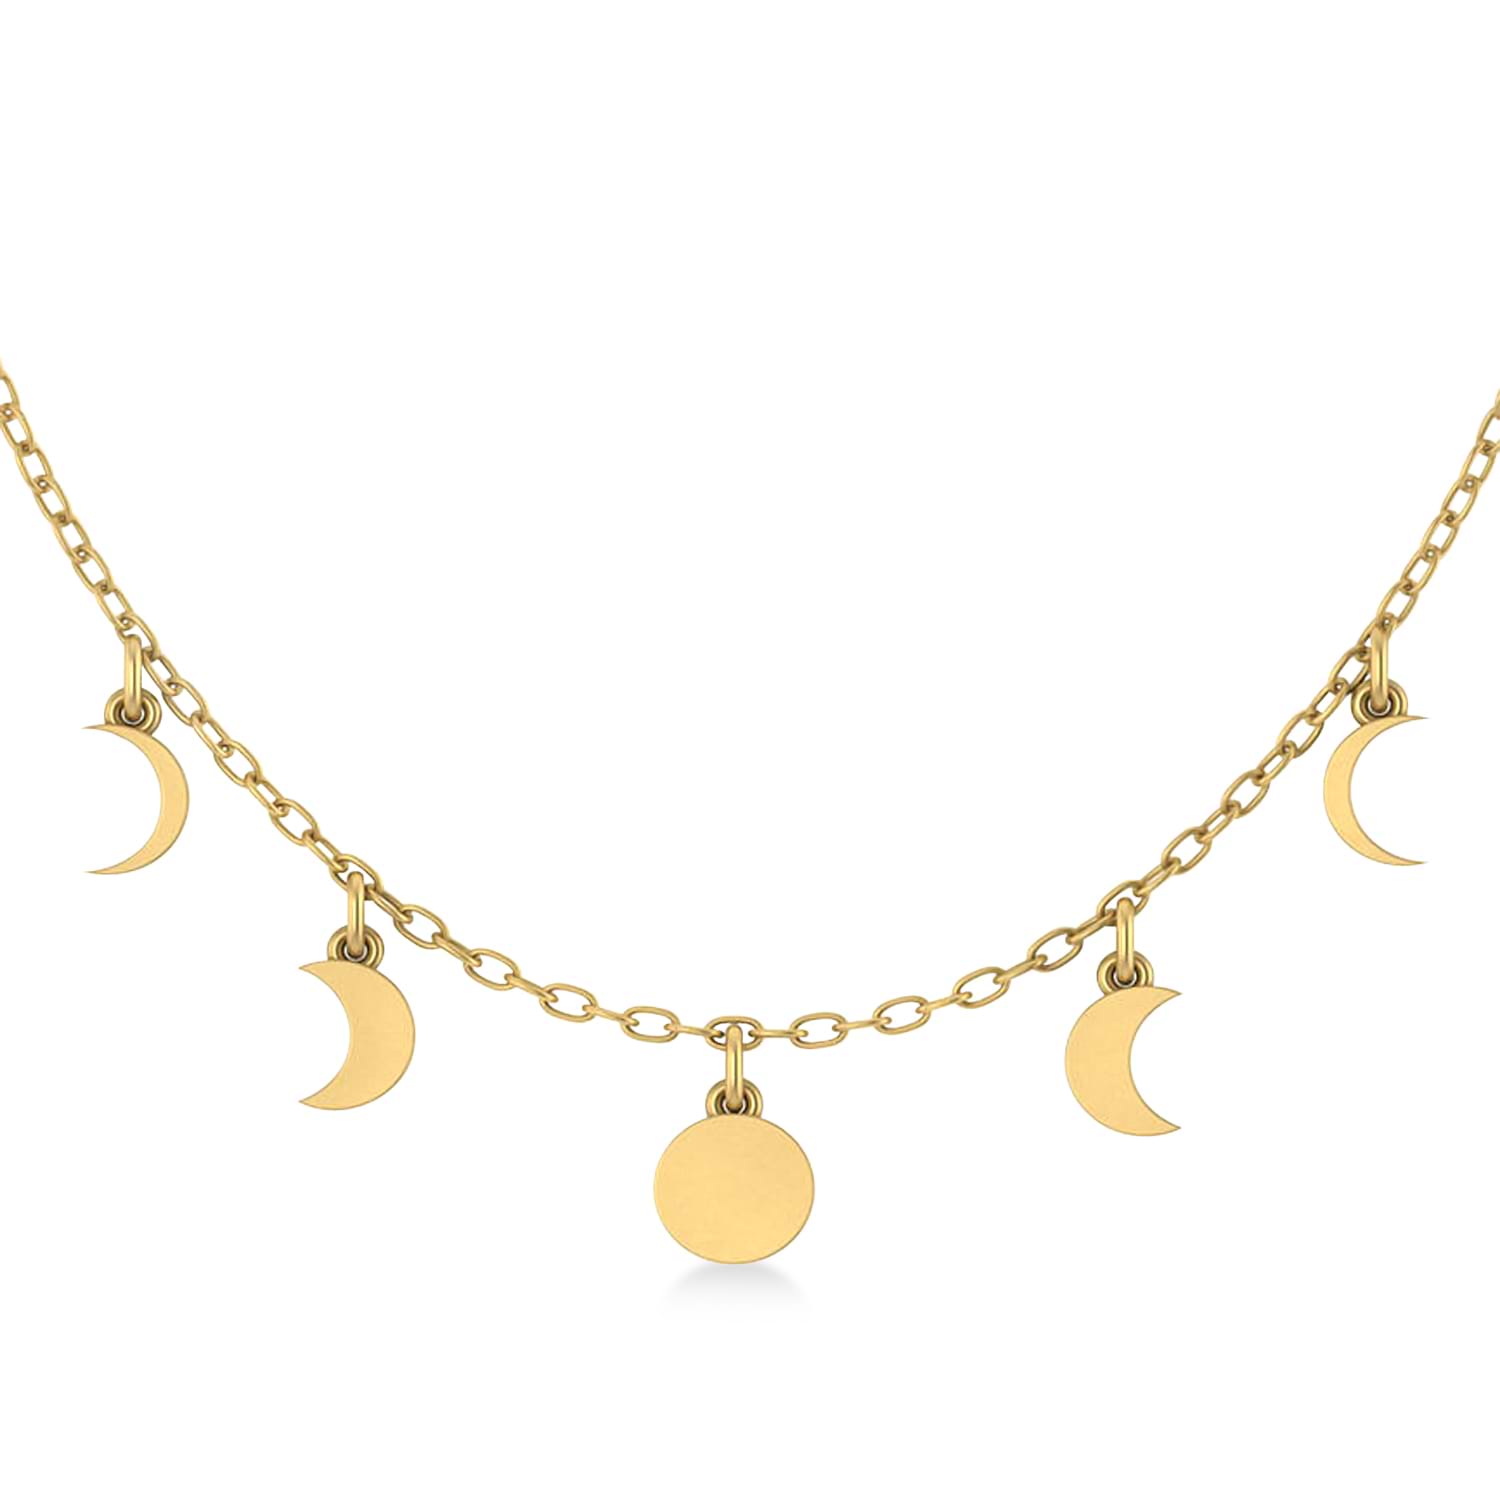 Multi-Moon Phase Pendant Necklace 14k Yellow Gold